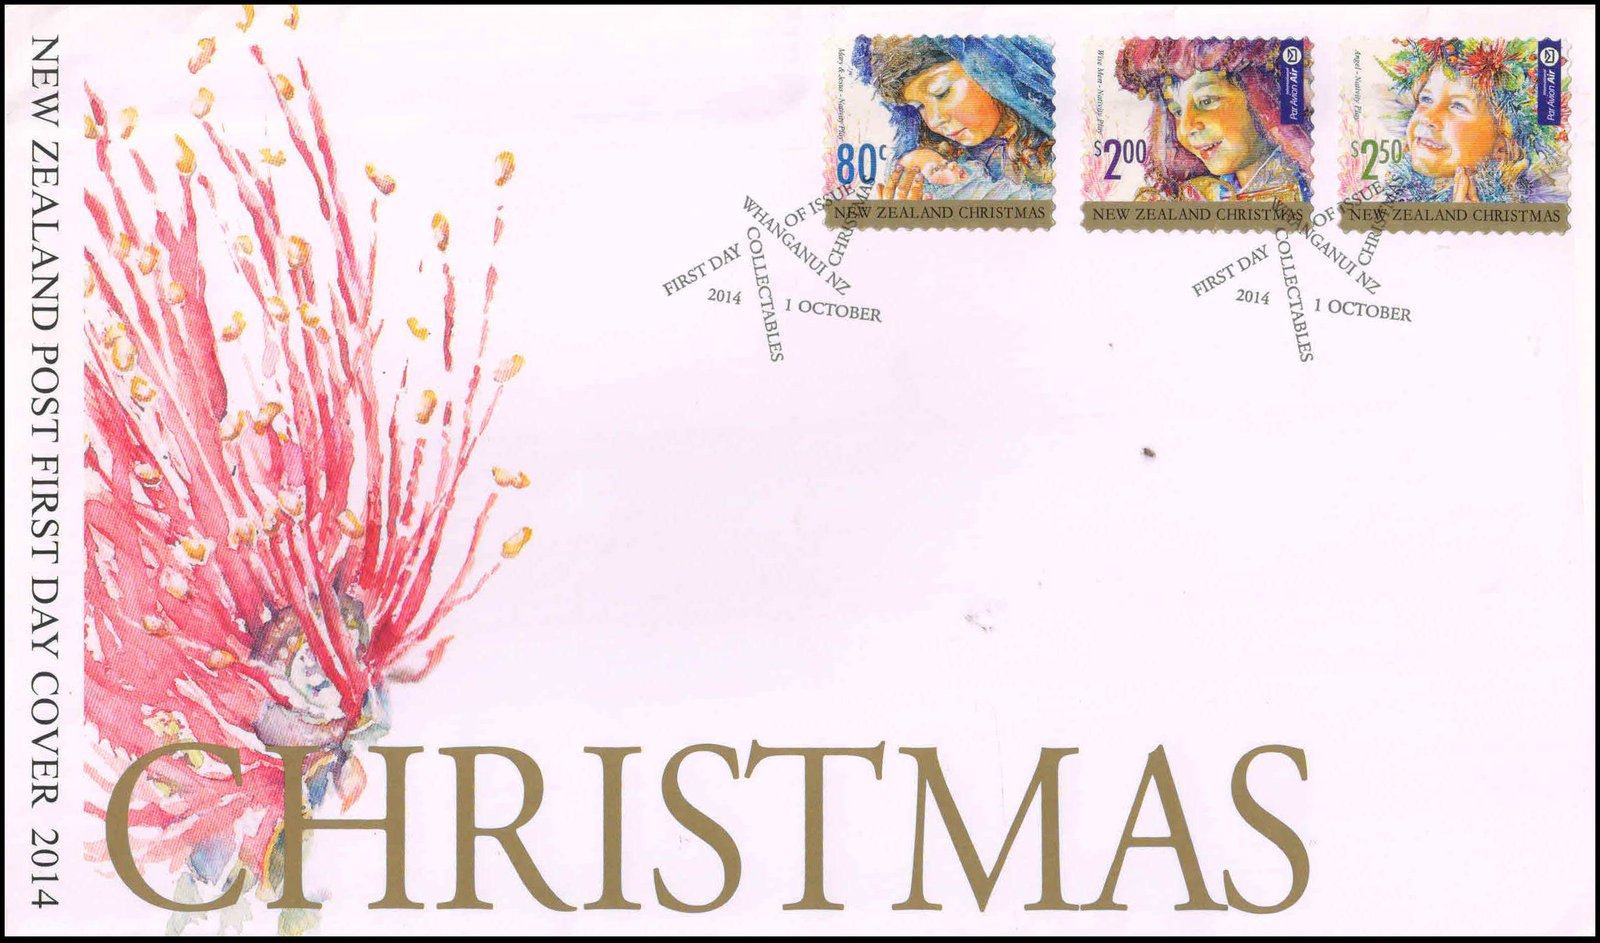 NEW ZEALAND 2014-Christmas, Mary and Jesus, Set of 3 on F.D.C. Face $ 6-S.G. 3619-3621